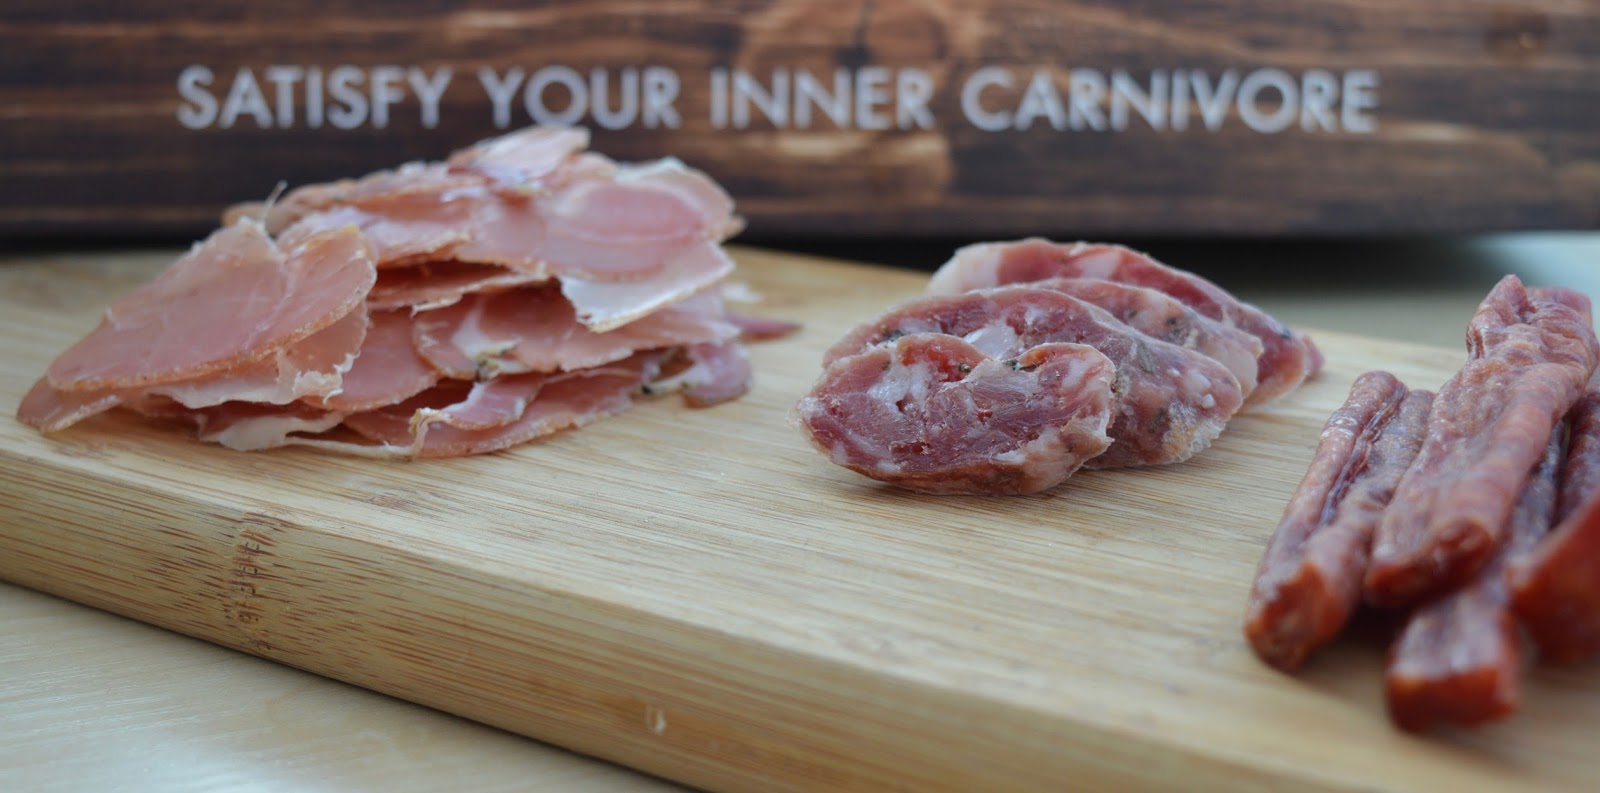 Carnivore Club - The Ultimate Meat Club Charcuterie Subscription Box - A review